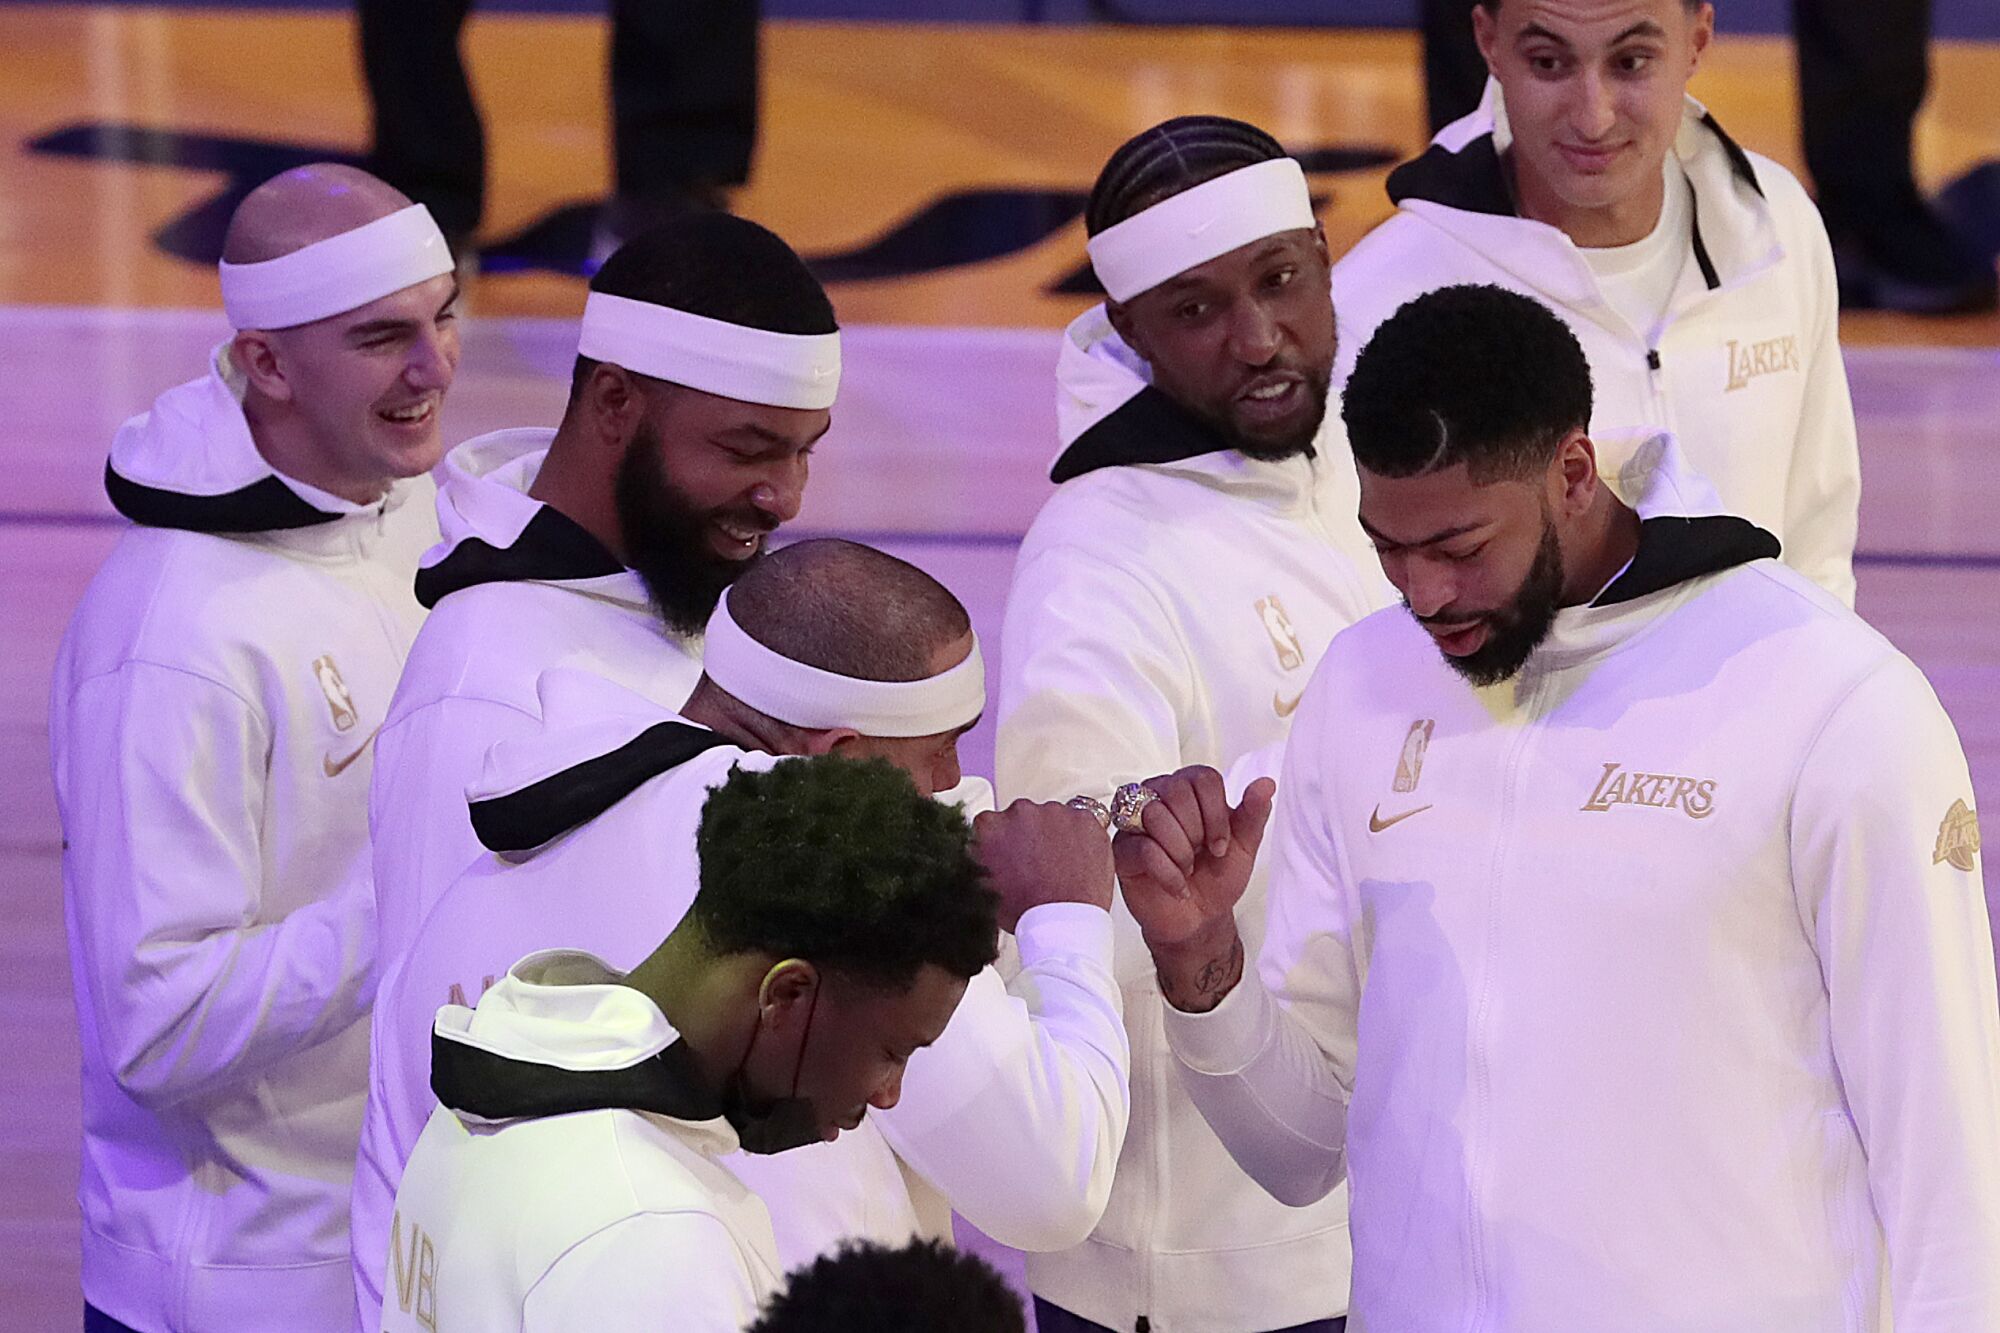 Lakers forward Anthony Davis, right, taps rings with teammate Jared Dudley.